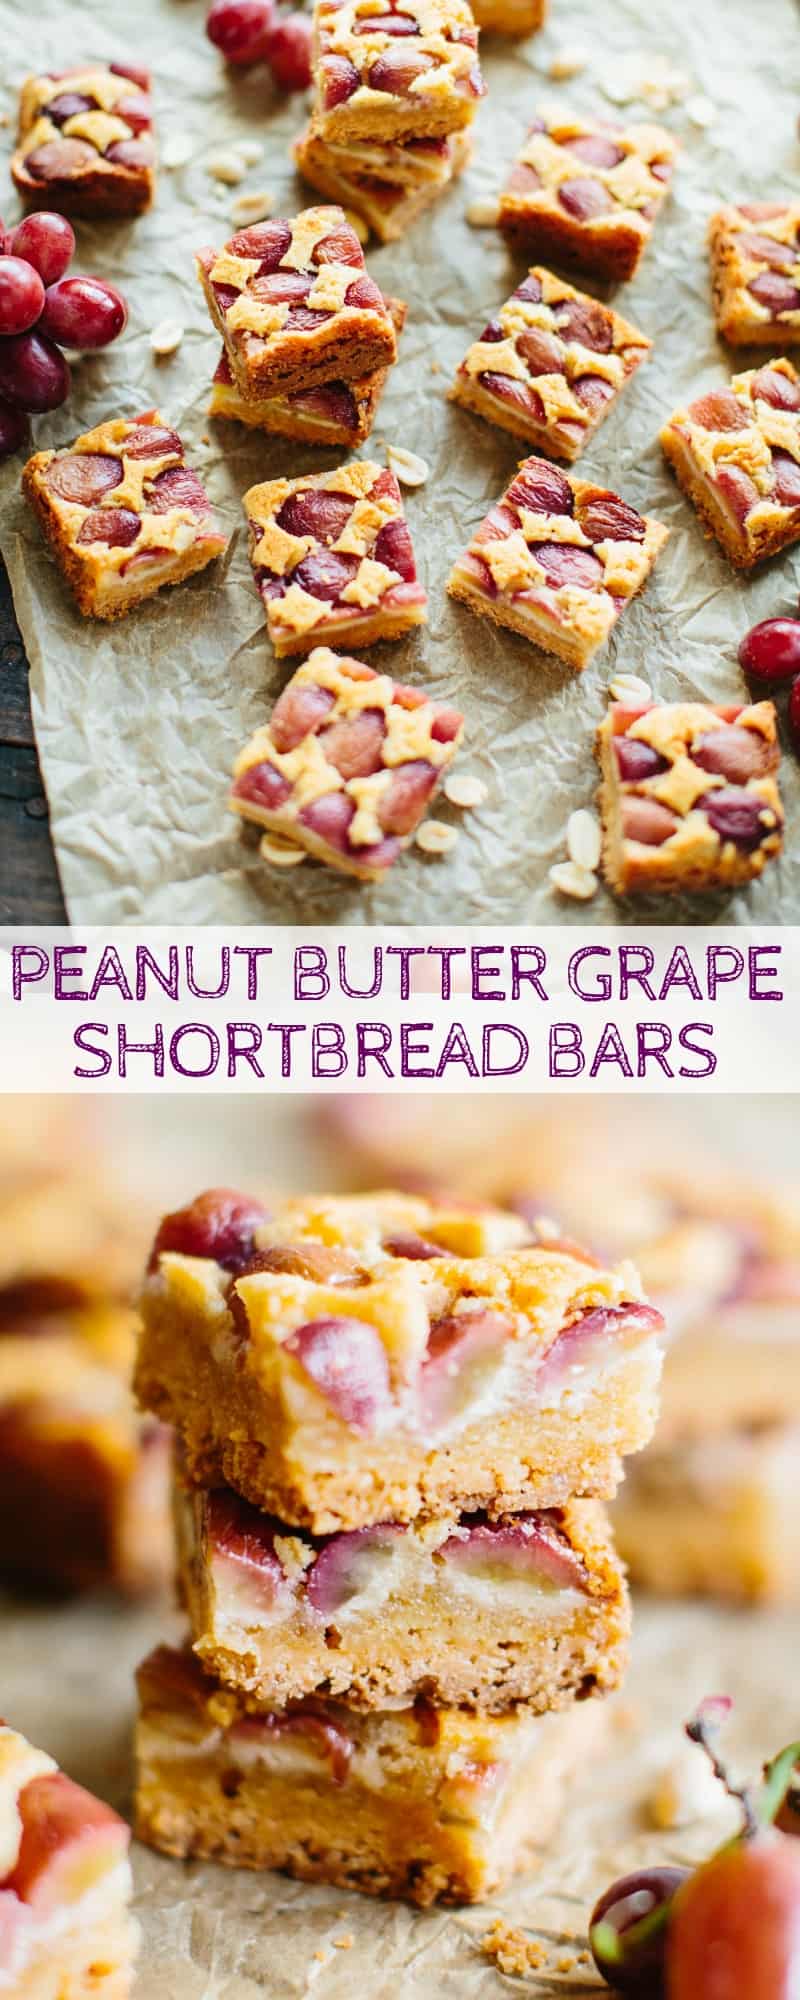 Vertical Pinterest image of peanut butter shortbread grape bars on a baking sheet and plate.